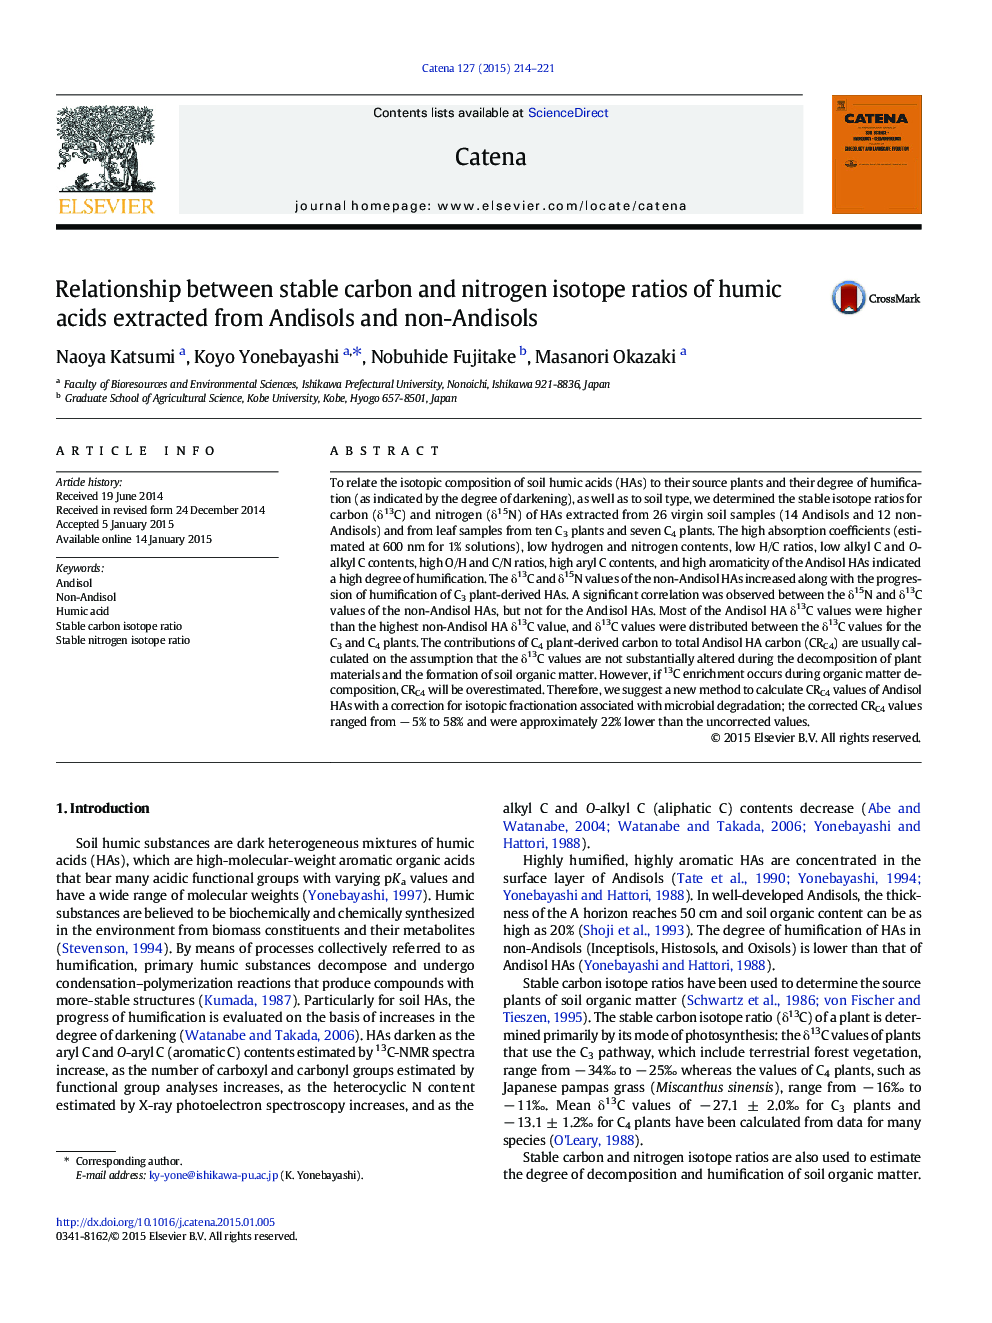 Relationship between stable carbon and nitrogen isotope ratios of humic acids extracted from Andisols and non-Andisols